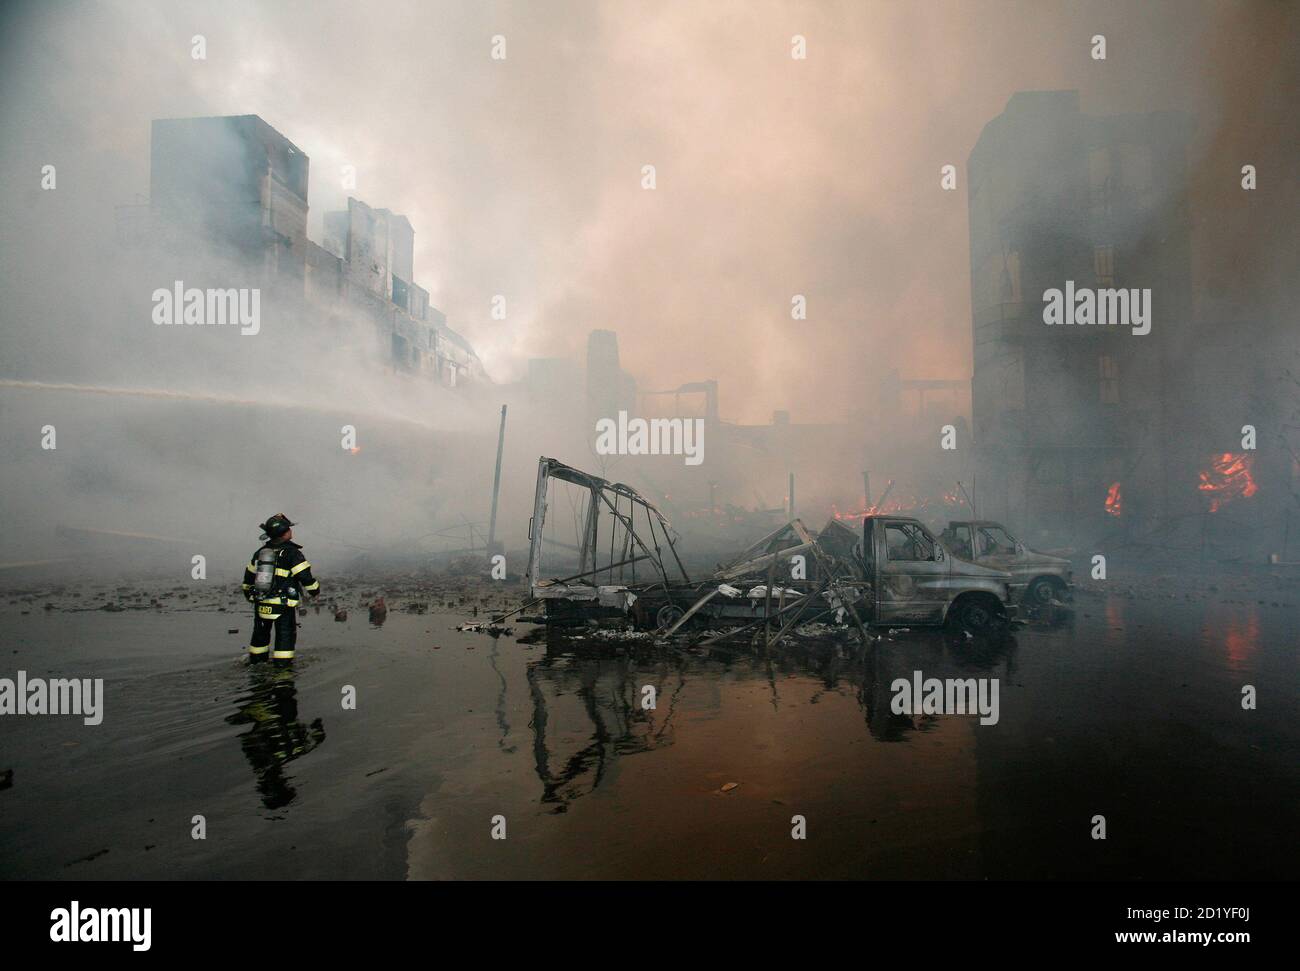 A New York City fireman battles a fire at a waterfront warehouse in Brooklyn, New York, May 2, 2006. The blaze, which had reached eight-alarm status and engulfed several buildings and wharfs along the East River, could be seen for miles.  Fire Commissioner Nicholas Scoppetta called it the largest fire in the city in more than a decade, excluding the World Trade Center attack. Stock Photo